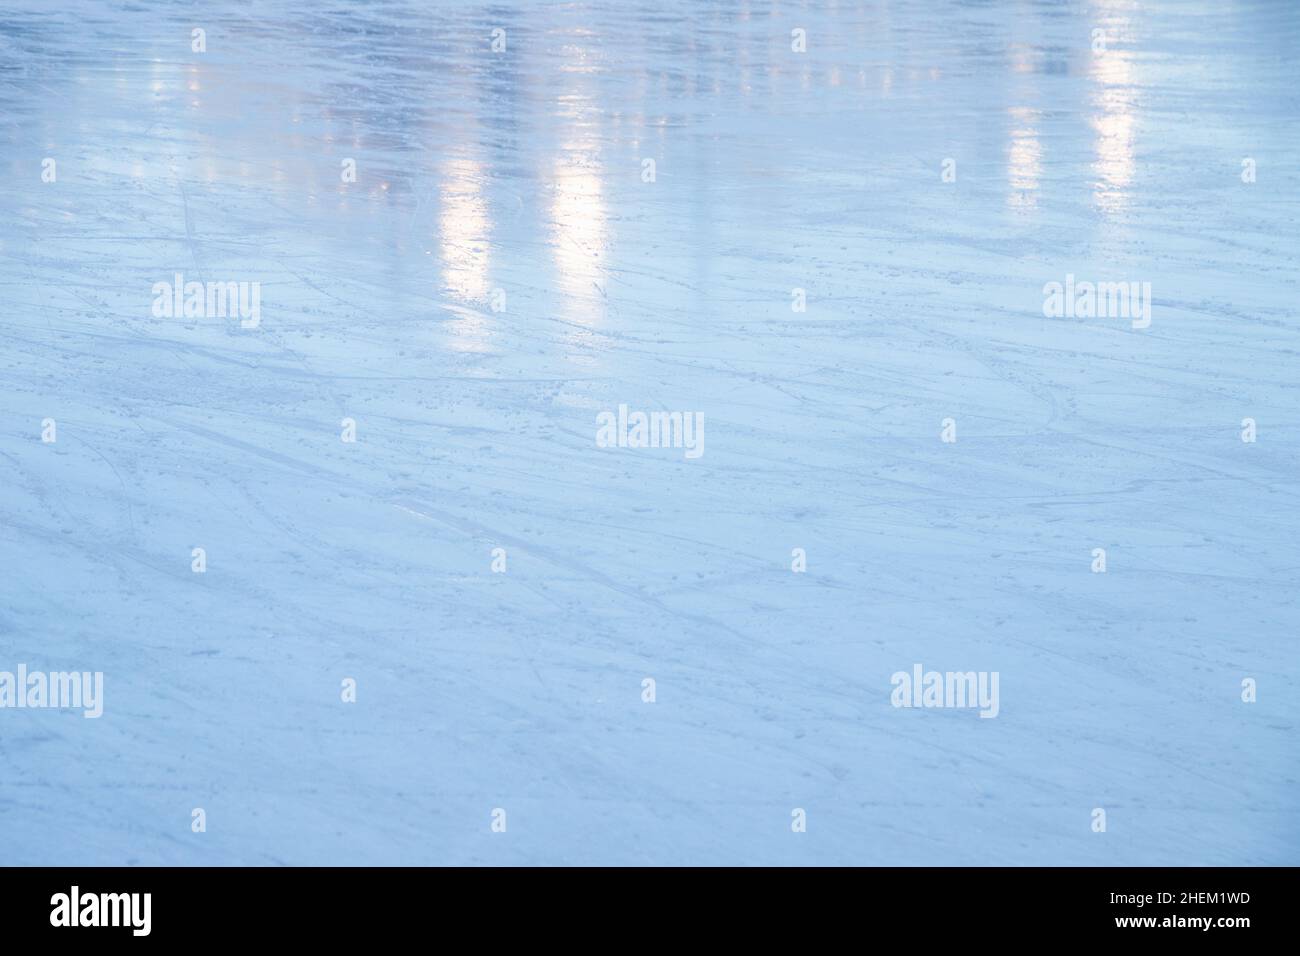 Light blue ice rink with reflections, abstract skating background texture Stock Photo